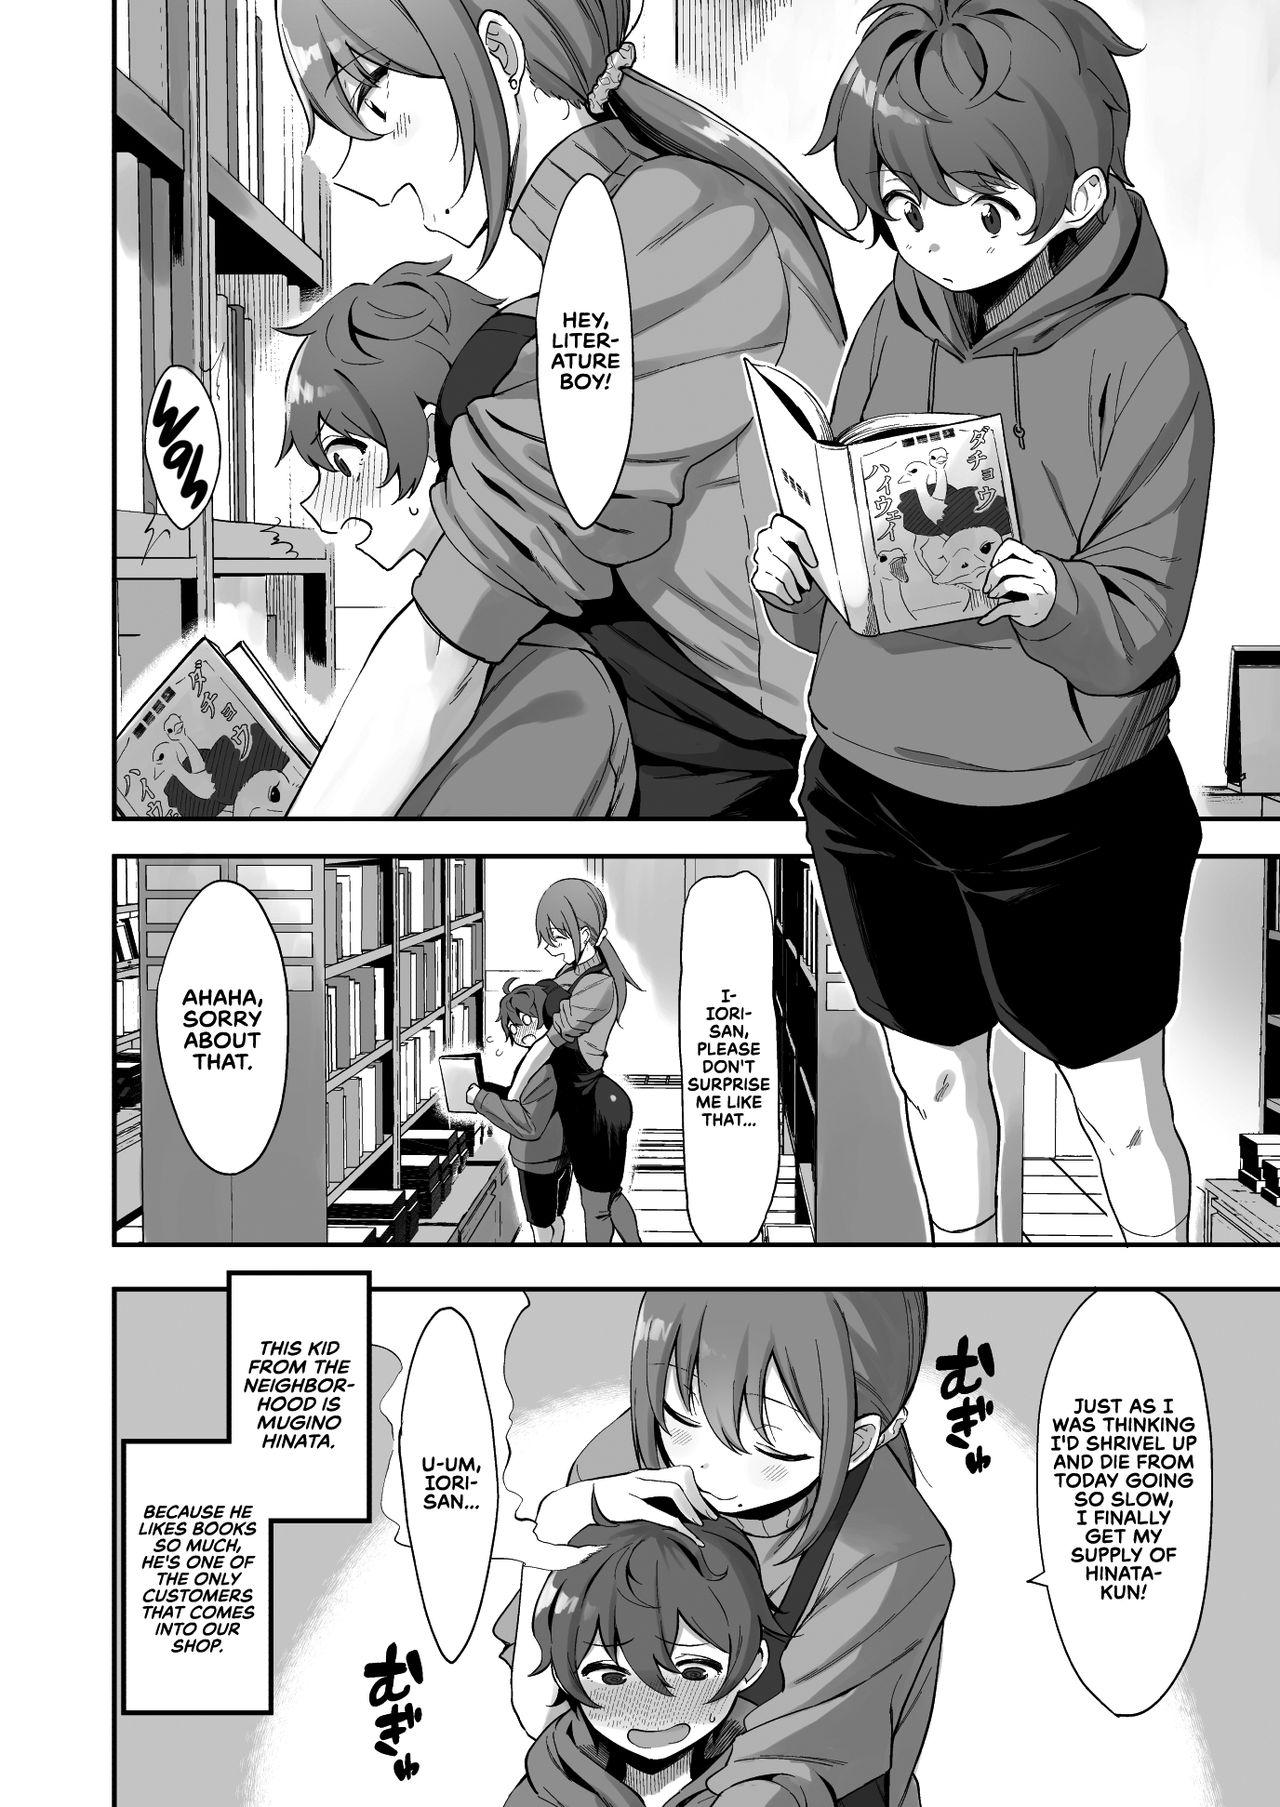 Furuhonya no Onee-san to | With The Lady From The Used Book Shop 5